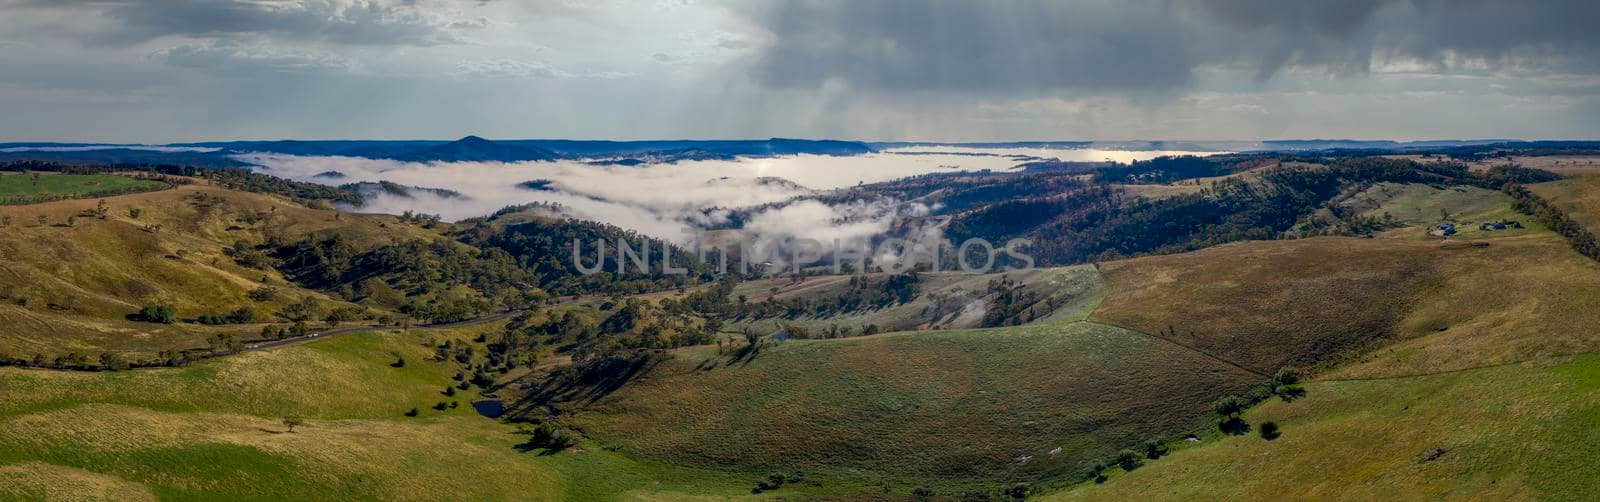 Aerial view of low-level clouds in a large green valley in the Central Tablelands in regional New South Wales Australia